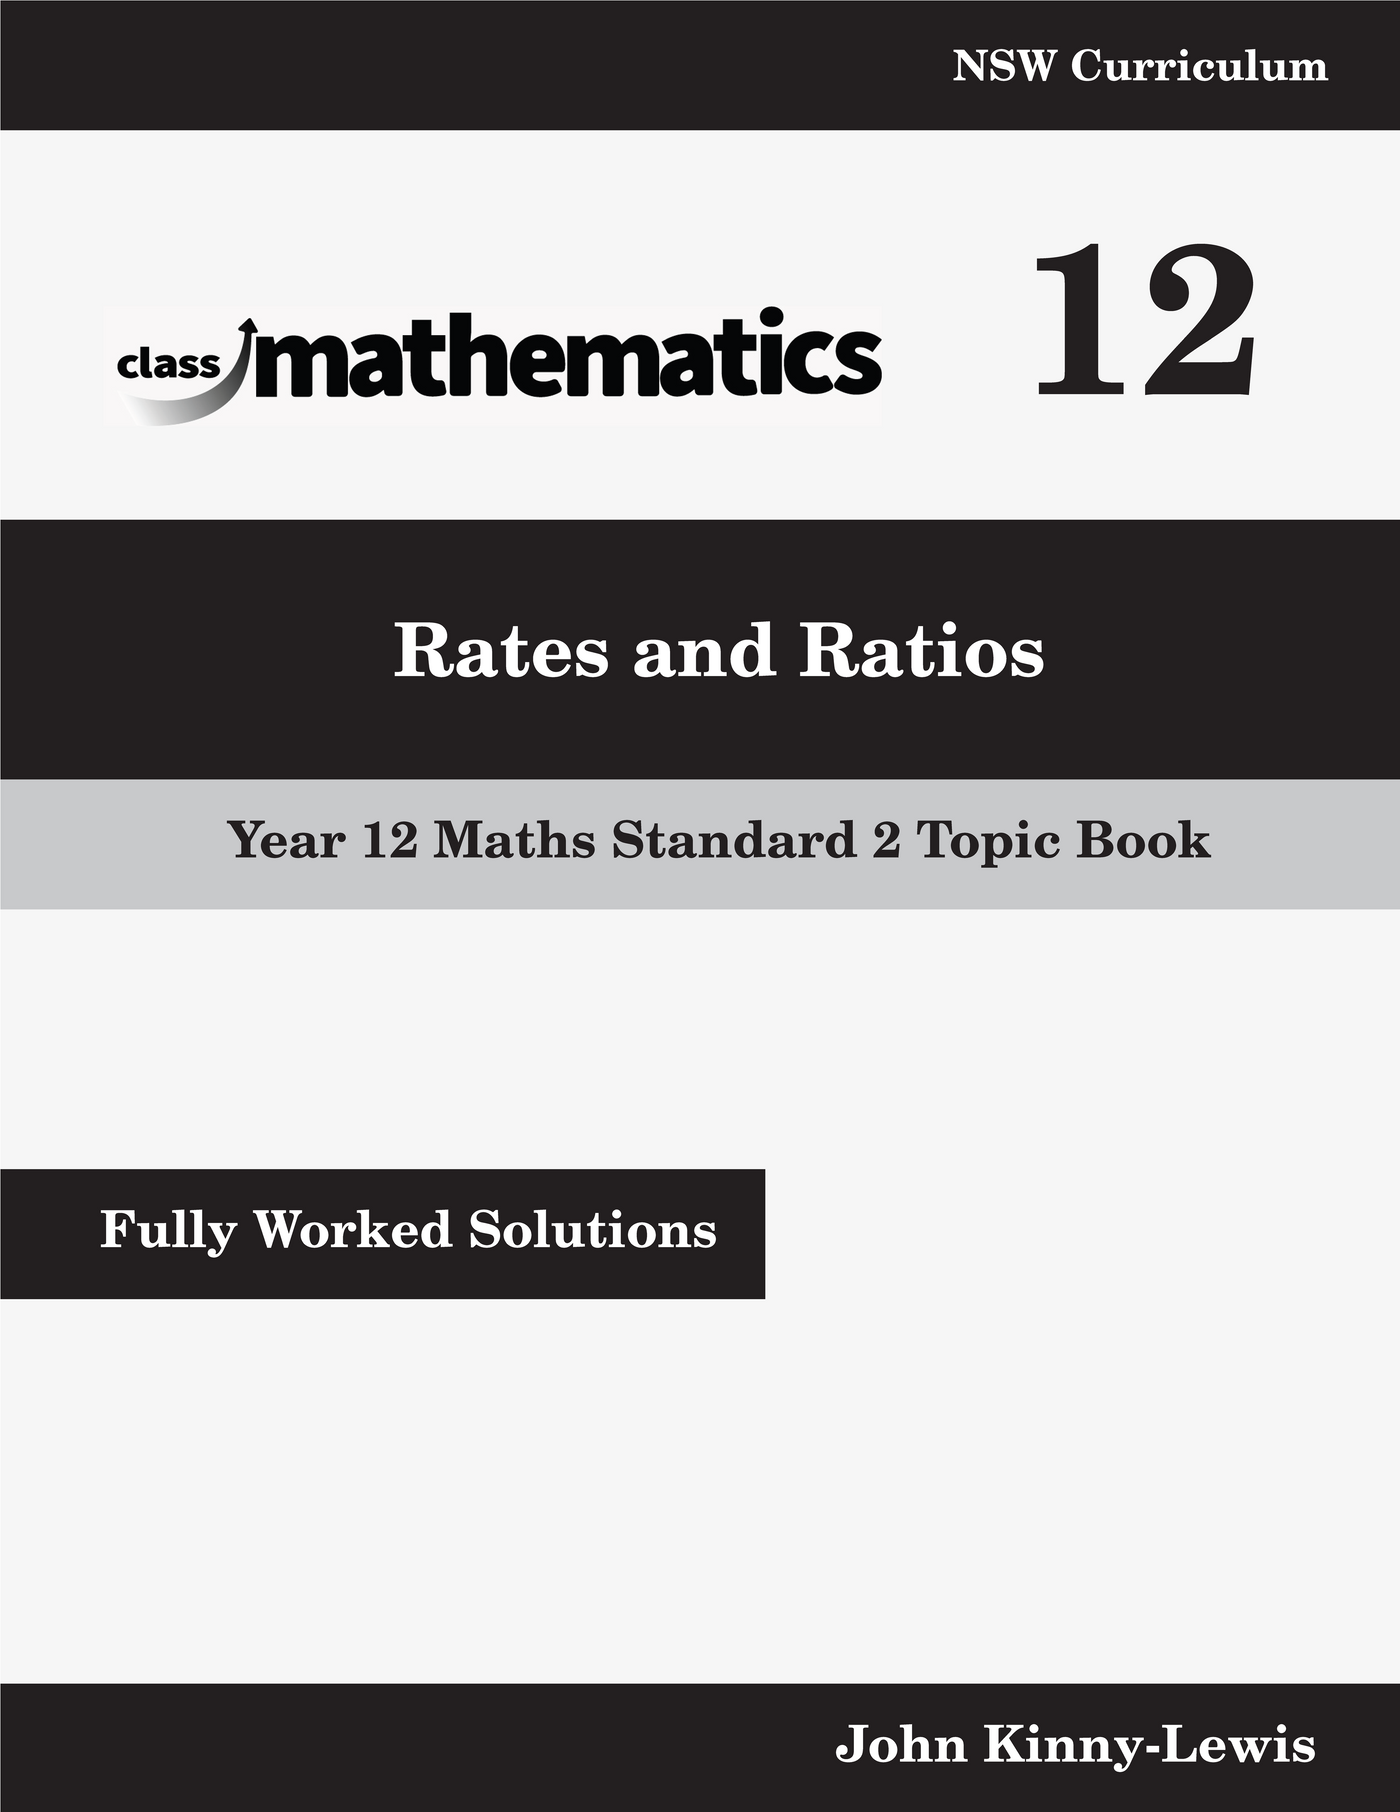 NSW Year 12 Maths Standard 2 - Rates and Ratios